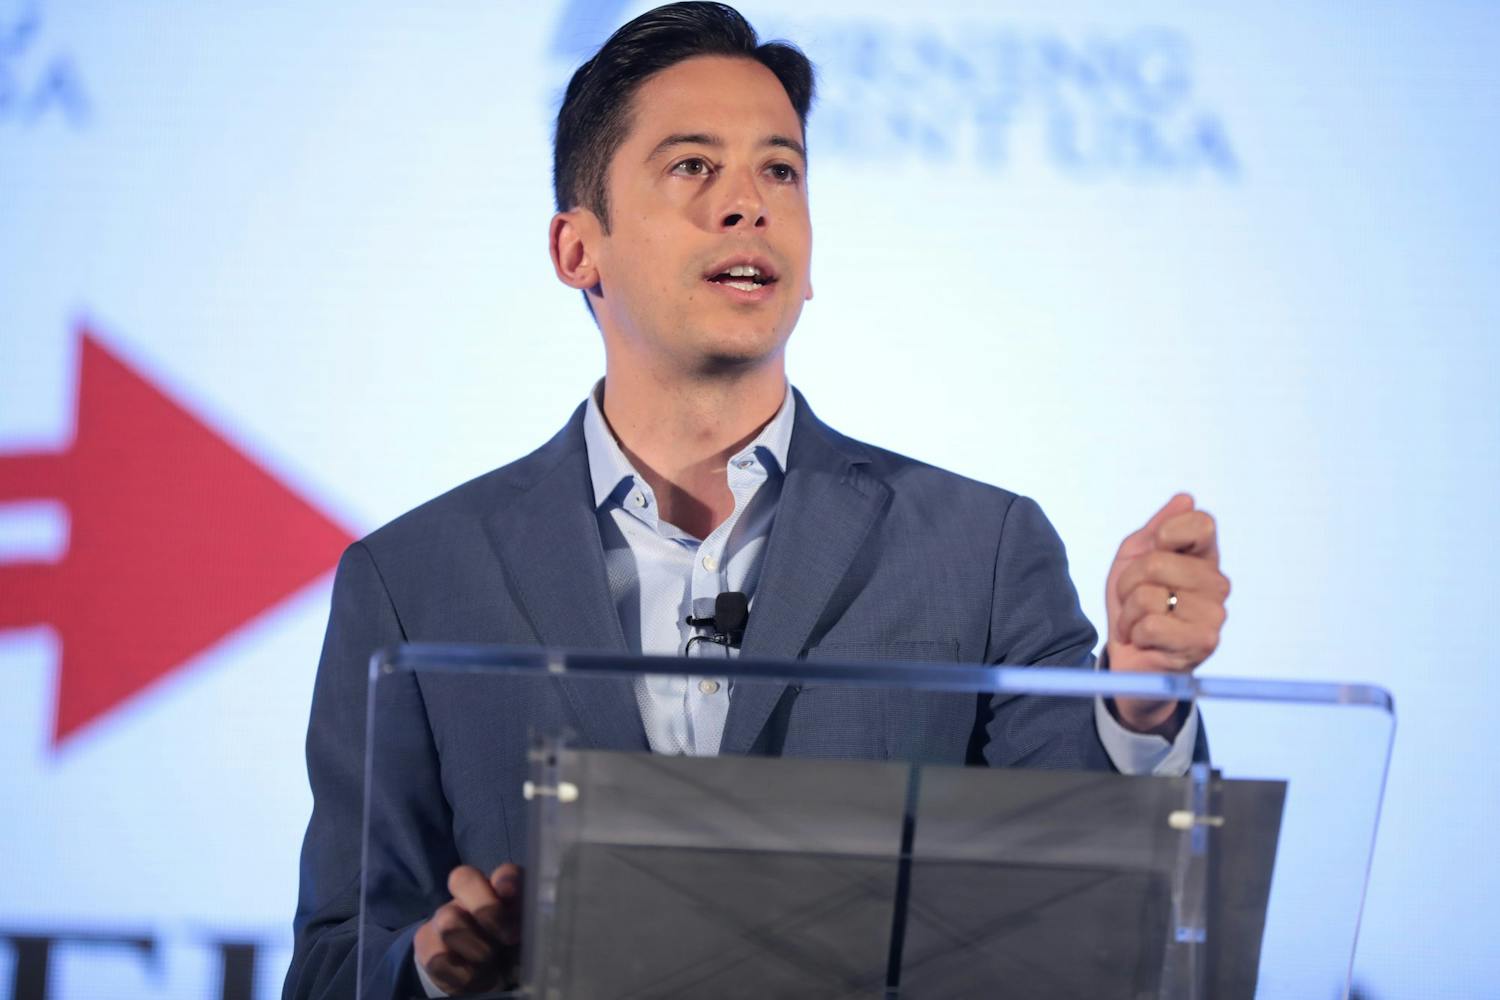 Conservative commentator Michael Knowles speaks with attendees at the 2019 Teen Student Action Summit hosted by Turning Point USA.&nbsp;